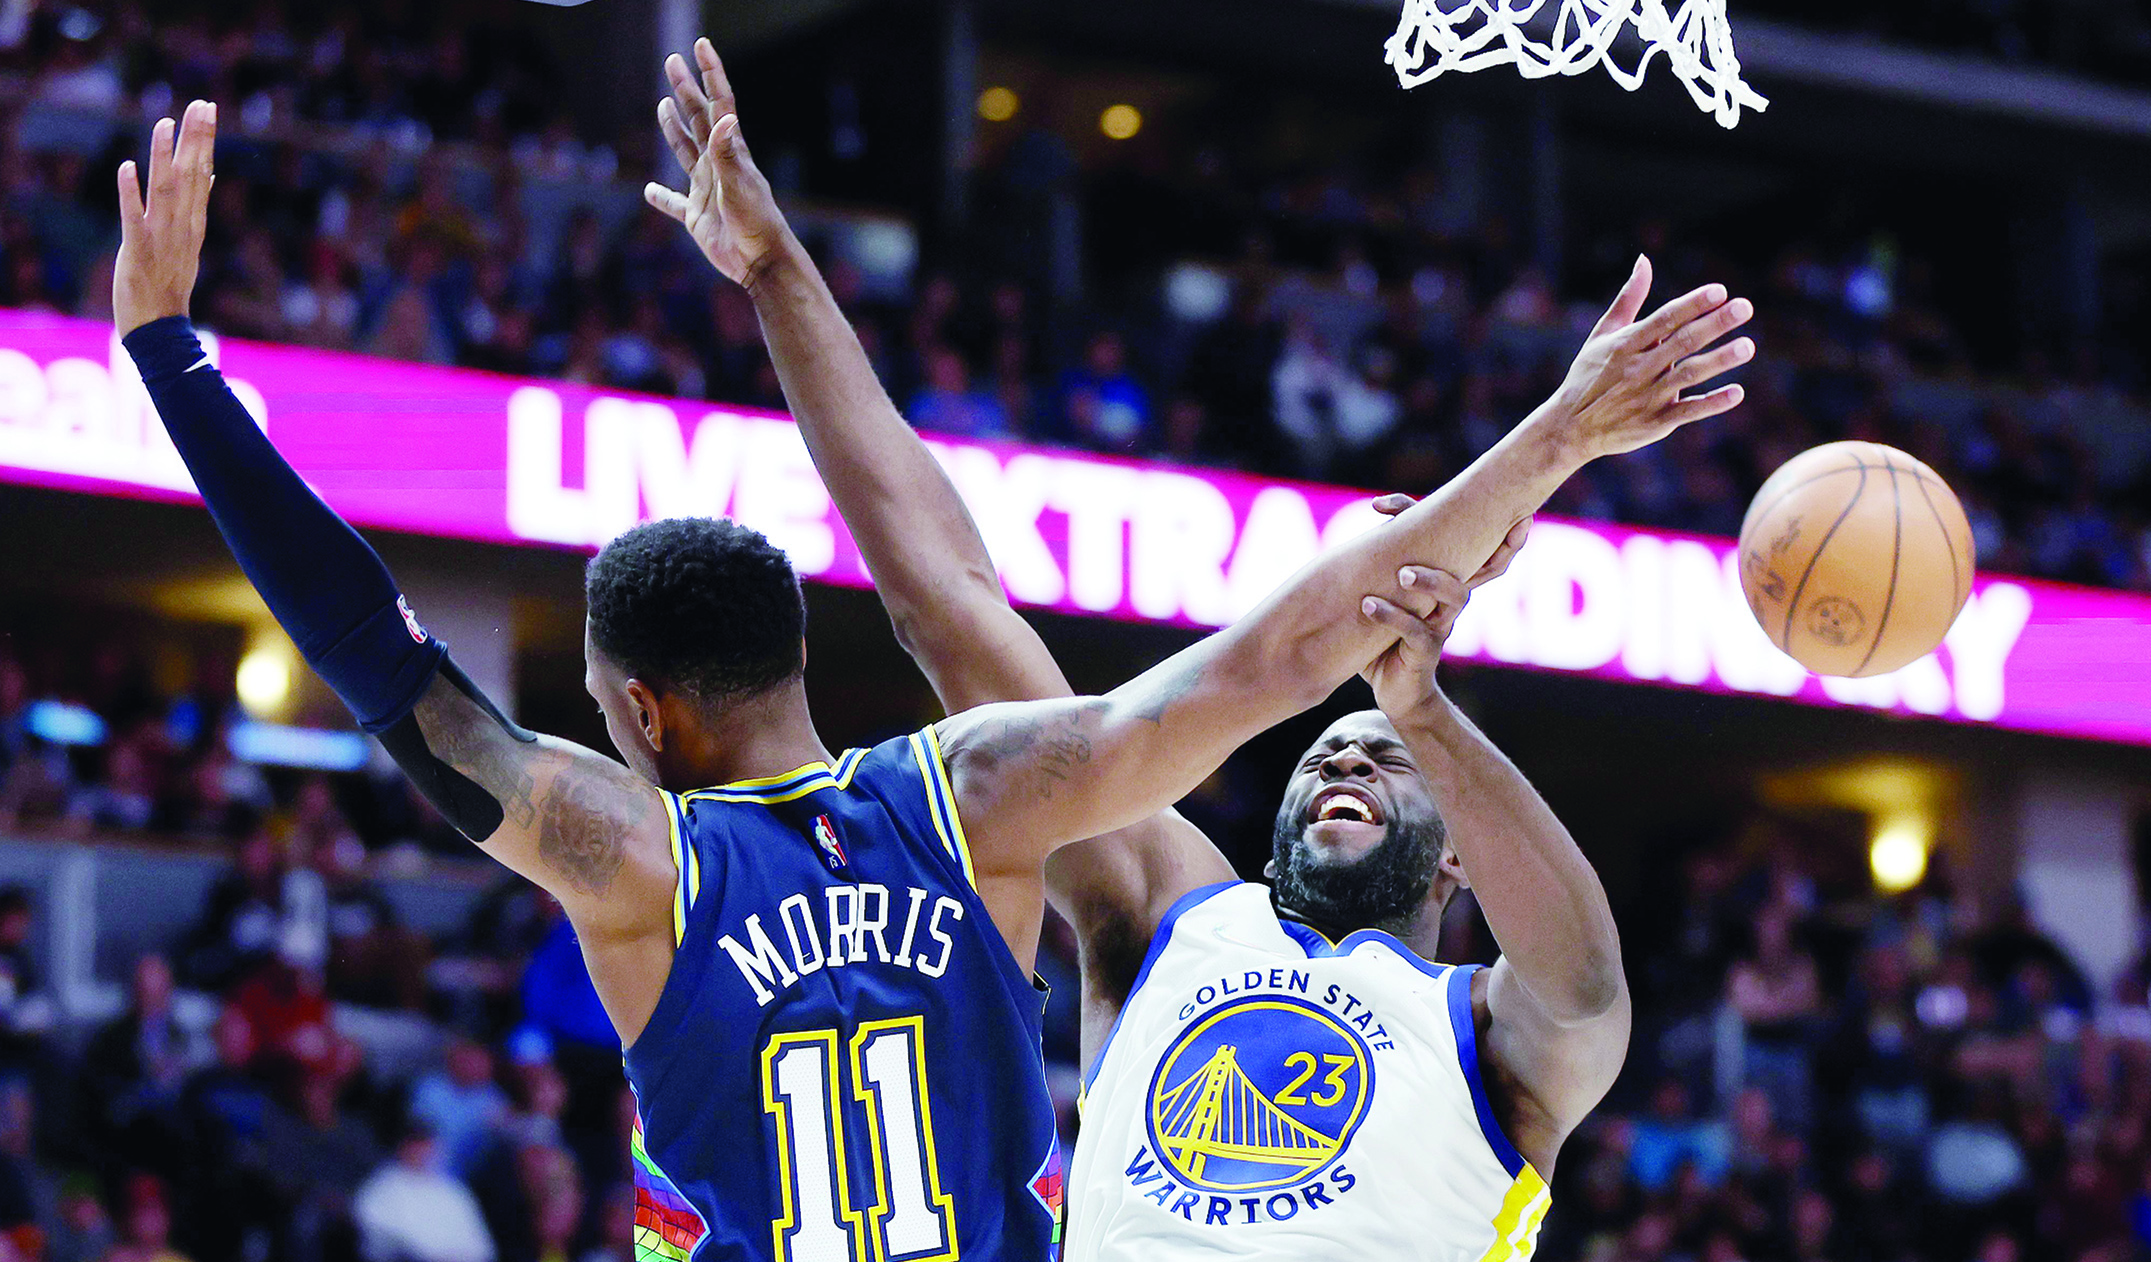 DENVER: Monte Morris #11 of the Denver Nuggets collides under the basket with Draymond Green #23 of the Golden State Warriors in the third quarter during Game Four of the Western Conference First Round NBA Playoffs at Ball Arena on April 24, 2022. - AFP